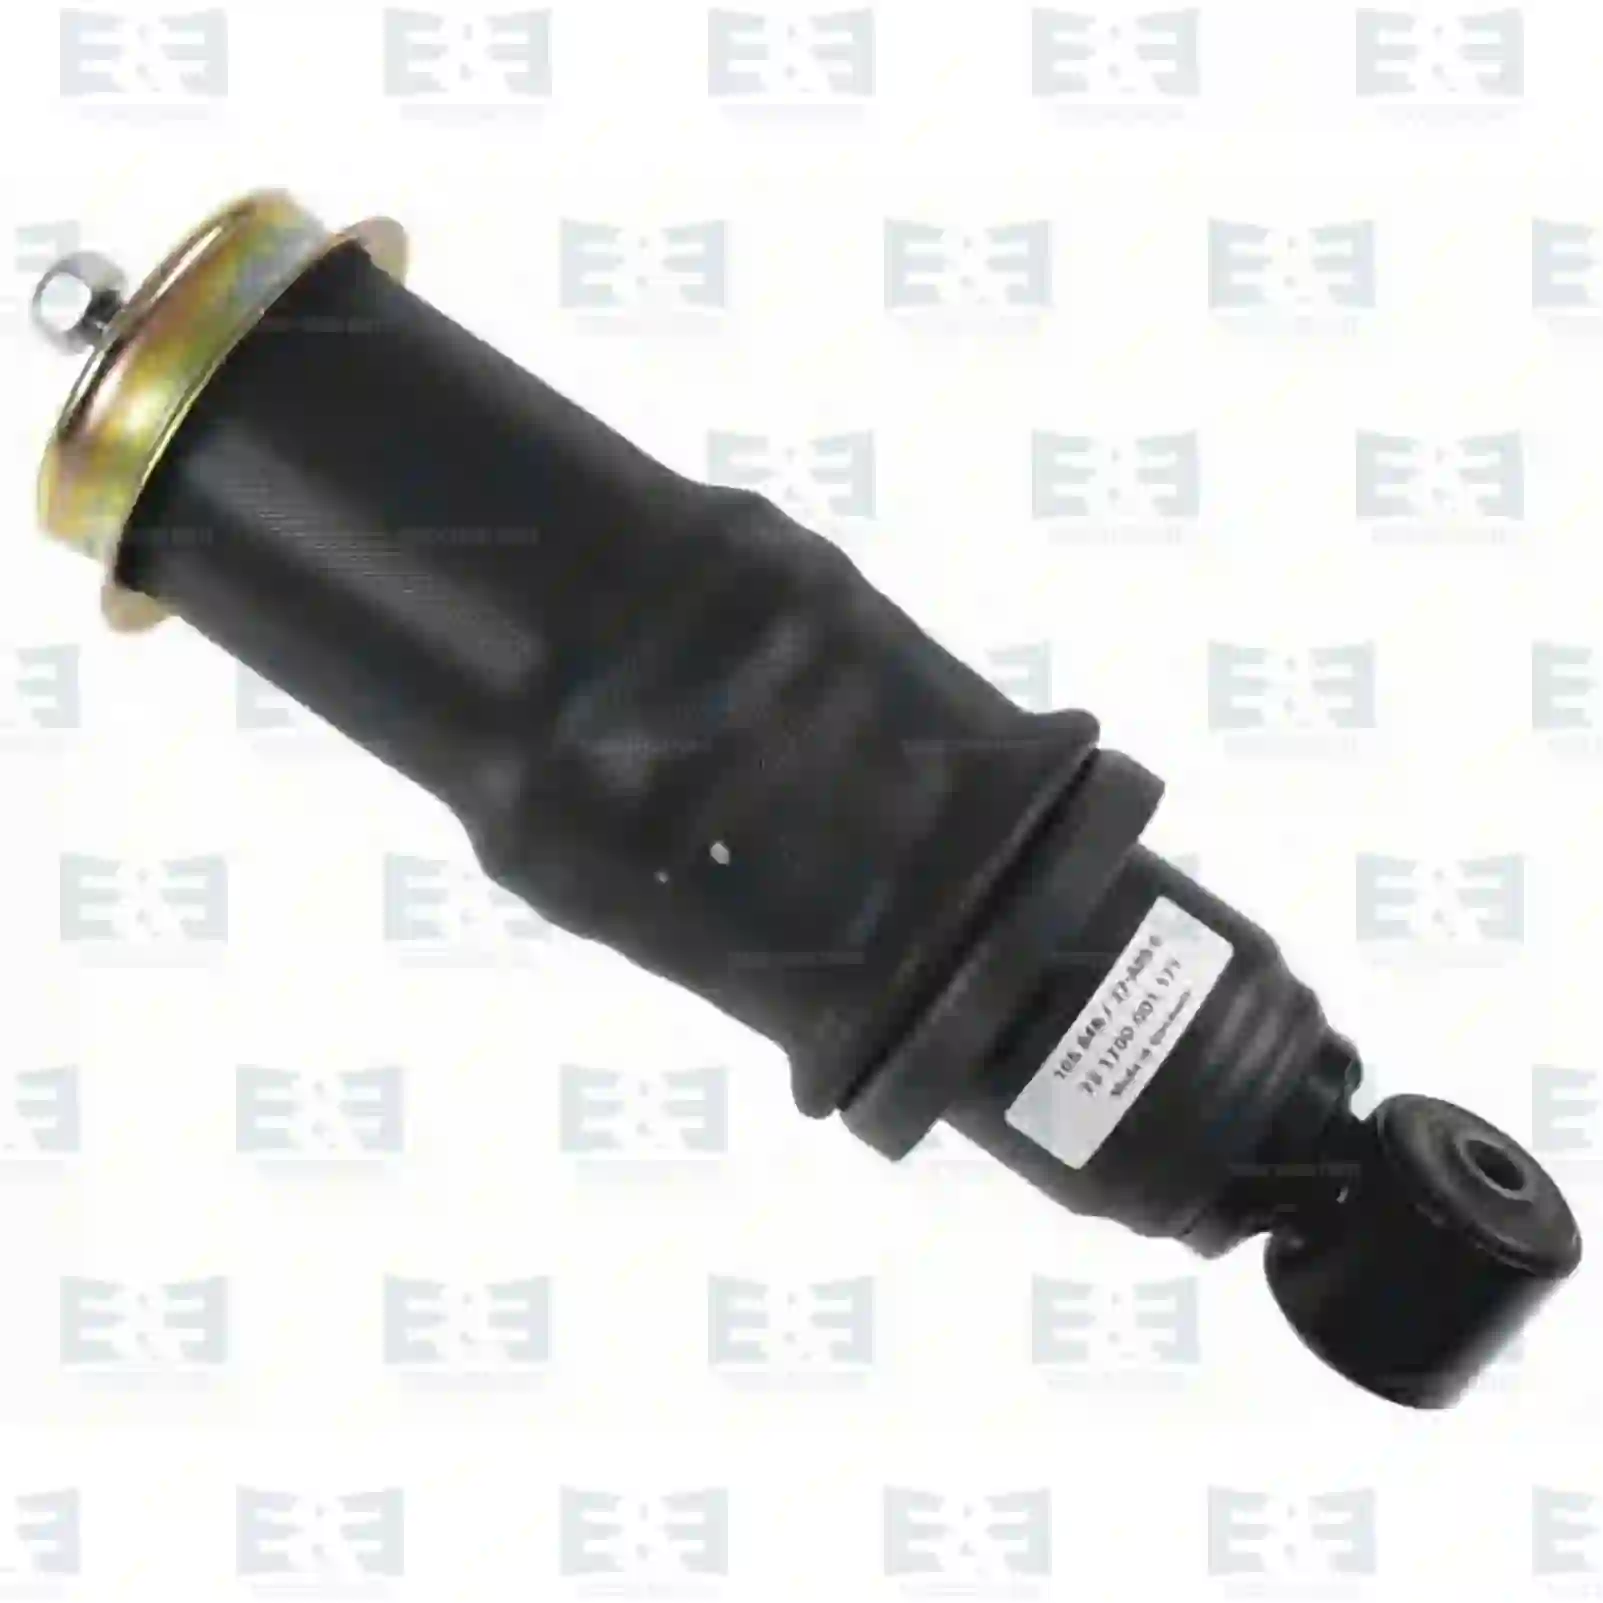 Cabin shock absorber, with air bellow, 2E2275164, 1117326, 1331626, 1348211, 1952434, , ||  2E2275164 E&E Truck Spare Parts | Truck Spare Parts, Auotomotive Spare Parts Cabin shock absorber, with air bellow, 2E2275164, 1117326, 1331626, 1348211, 1952434, , ||  2E2275164 E&E Truck Spare Parts | Truck Spare Parts, Auotomotive Spare Parts